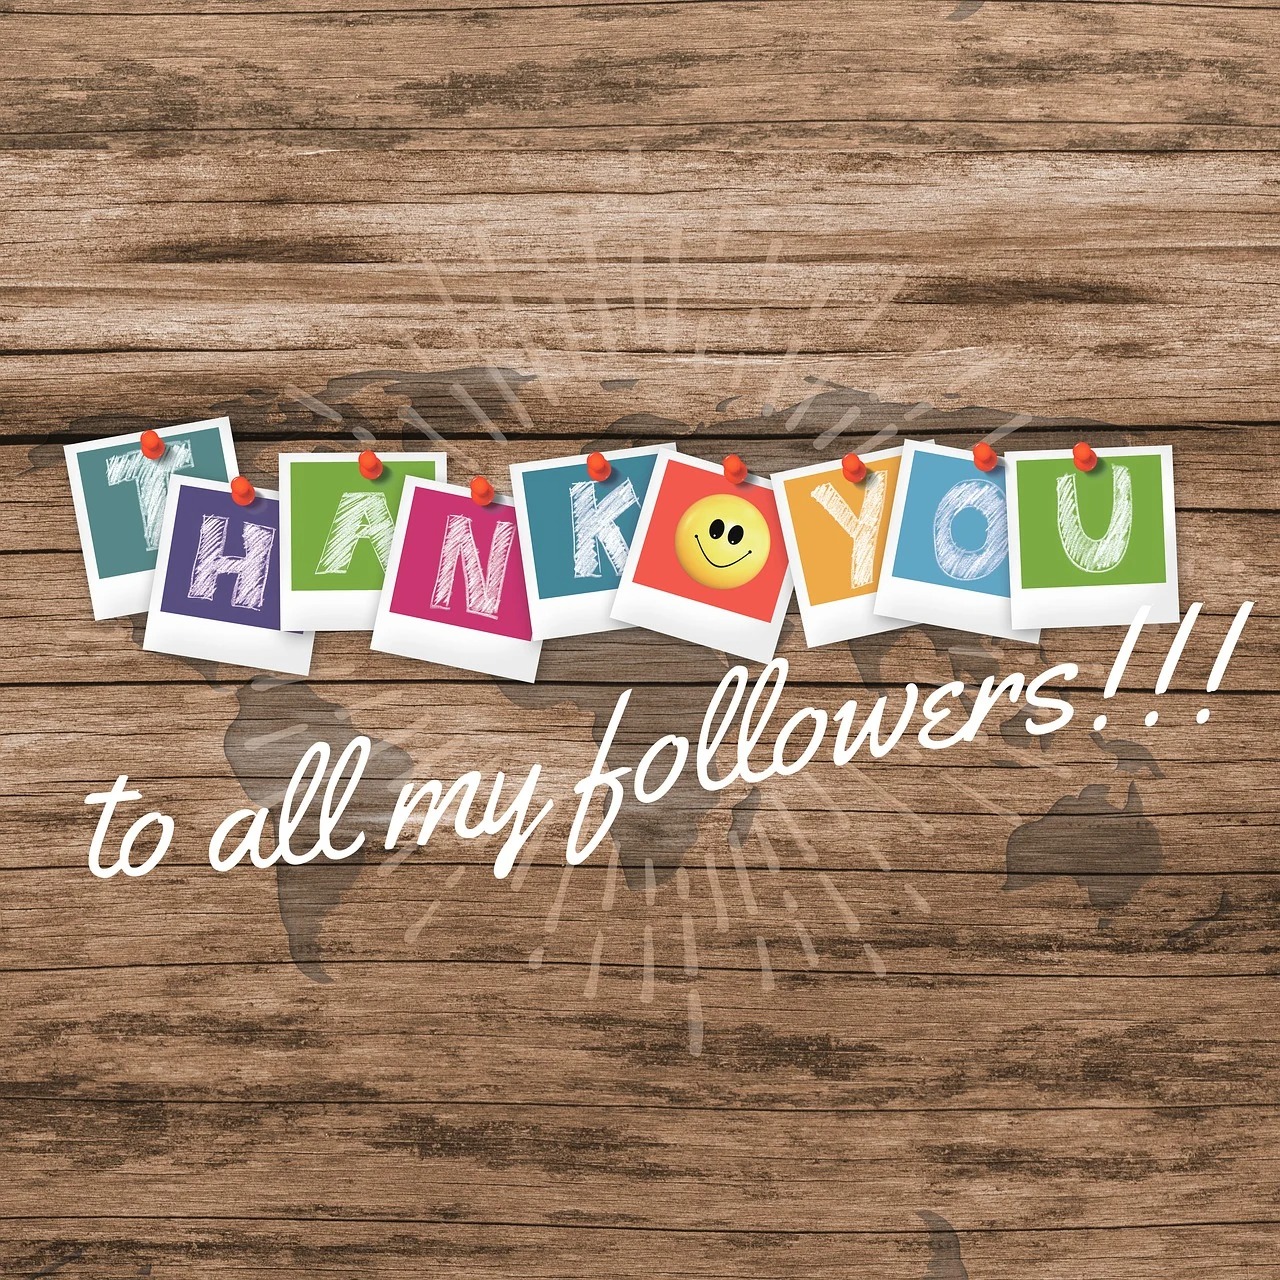 Thank you to all my followers